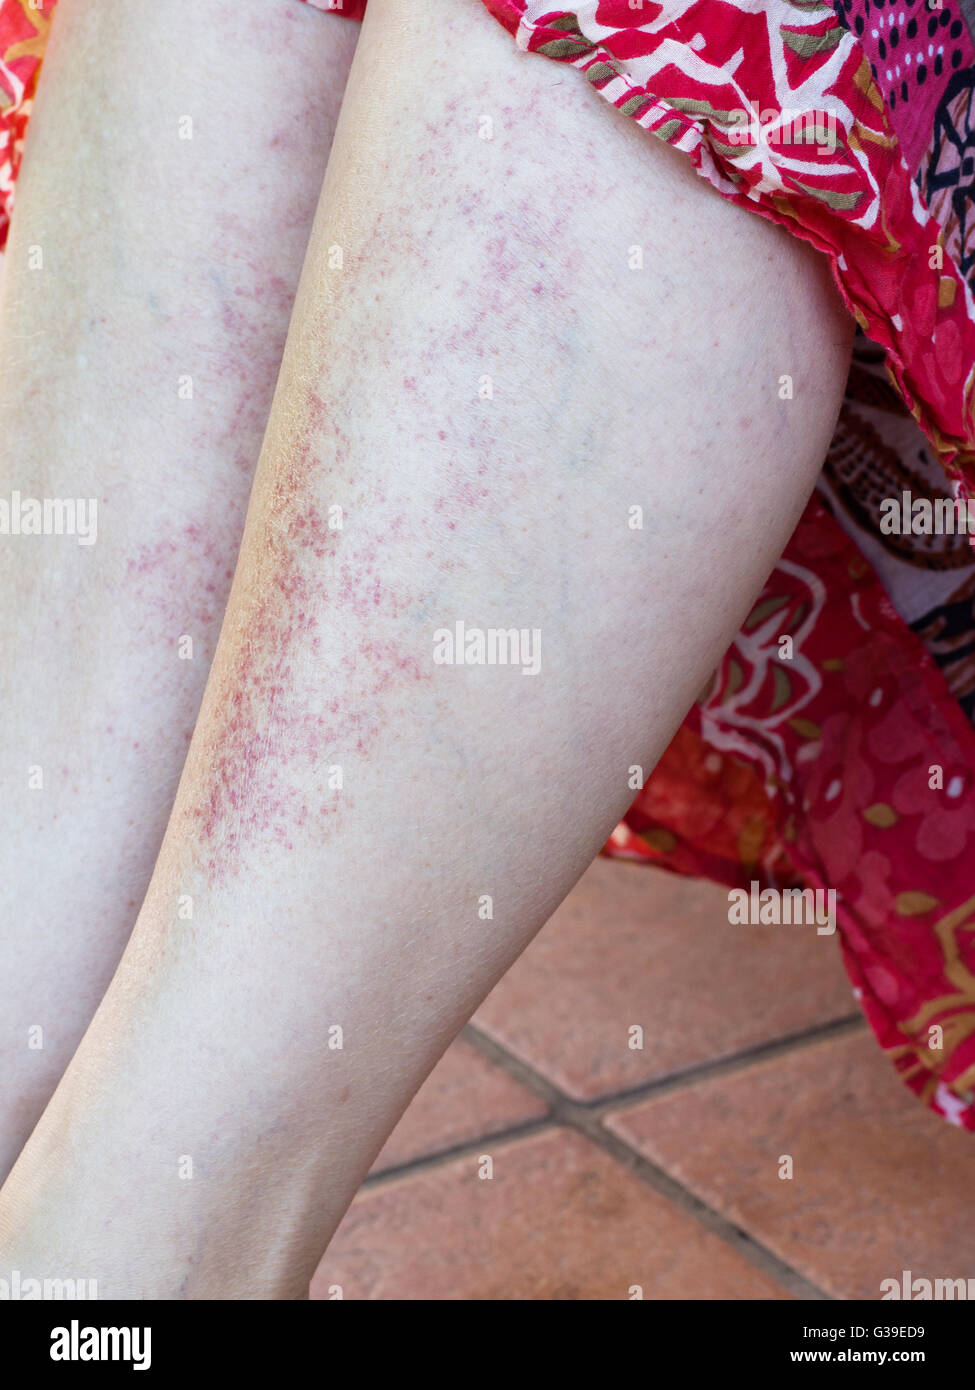 Red rash from combining sunbathing and medication. Allergy, sensitivity. Stock Photo